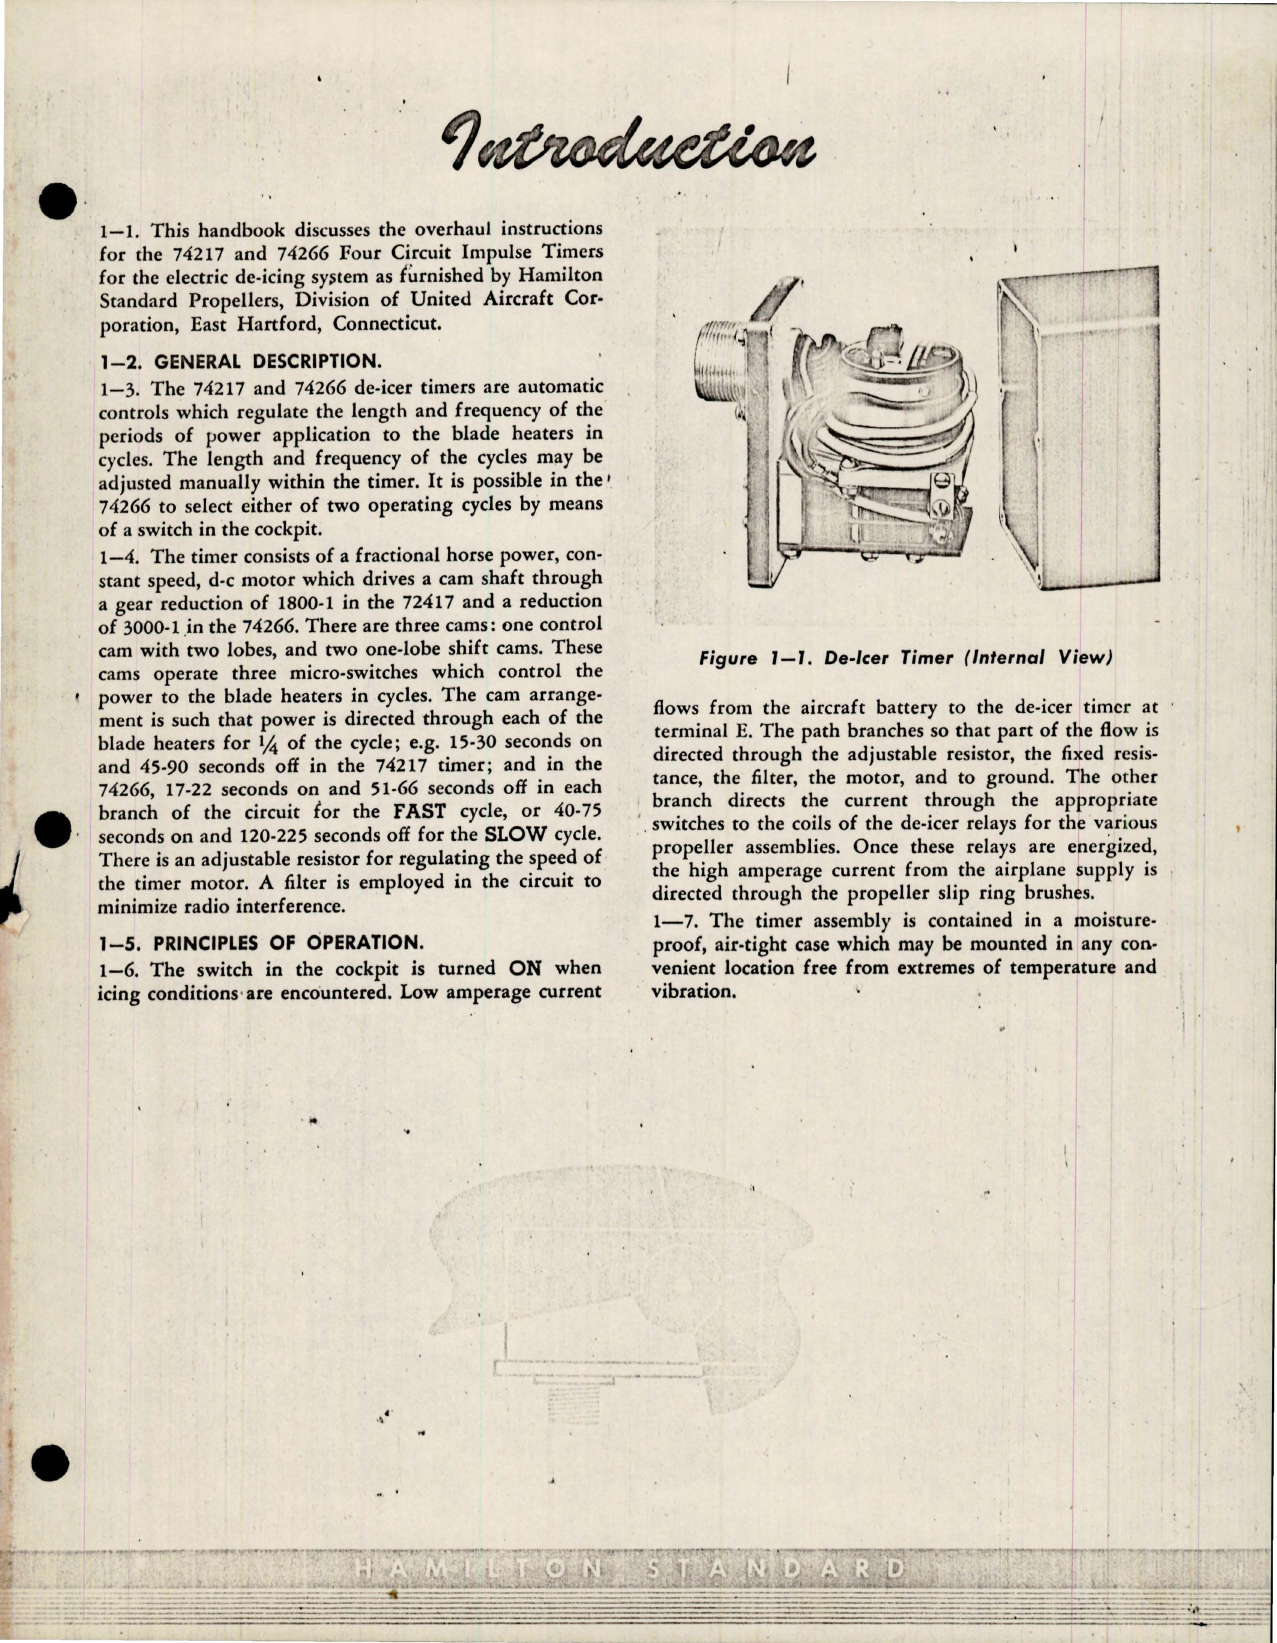 Sample page 5 from AirCorps Library document: Overhaul Manual w Parts for Electric De-Icer Timers - Models 74217 and 74266 